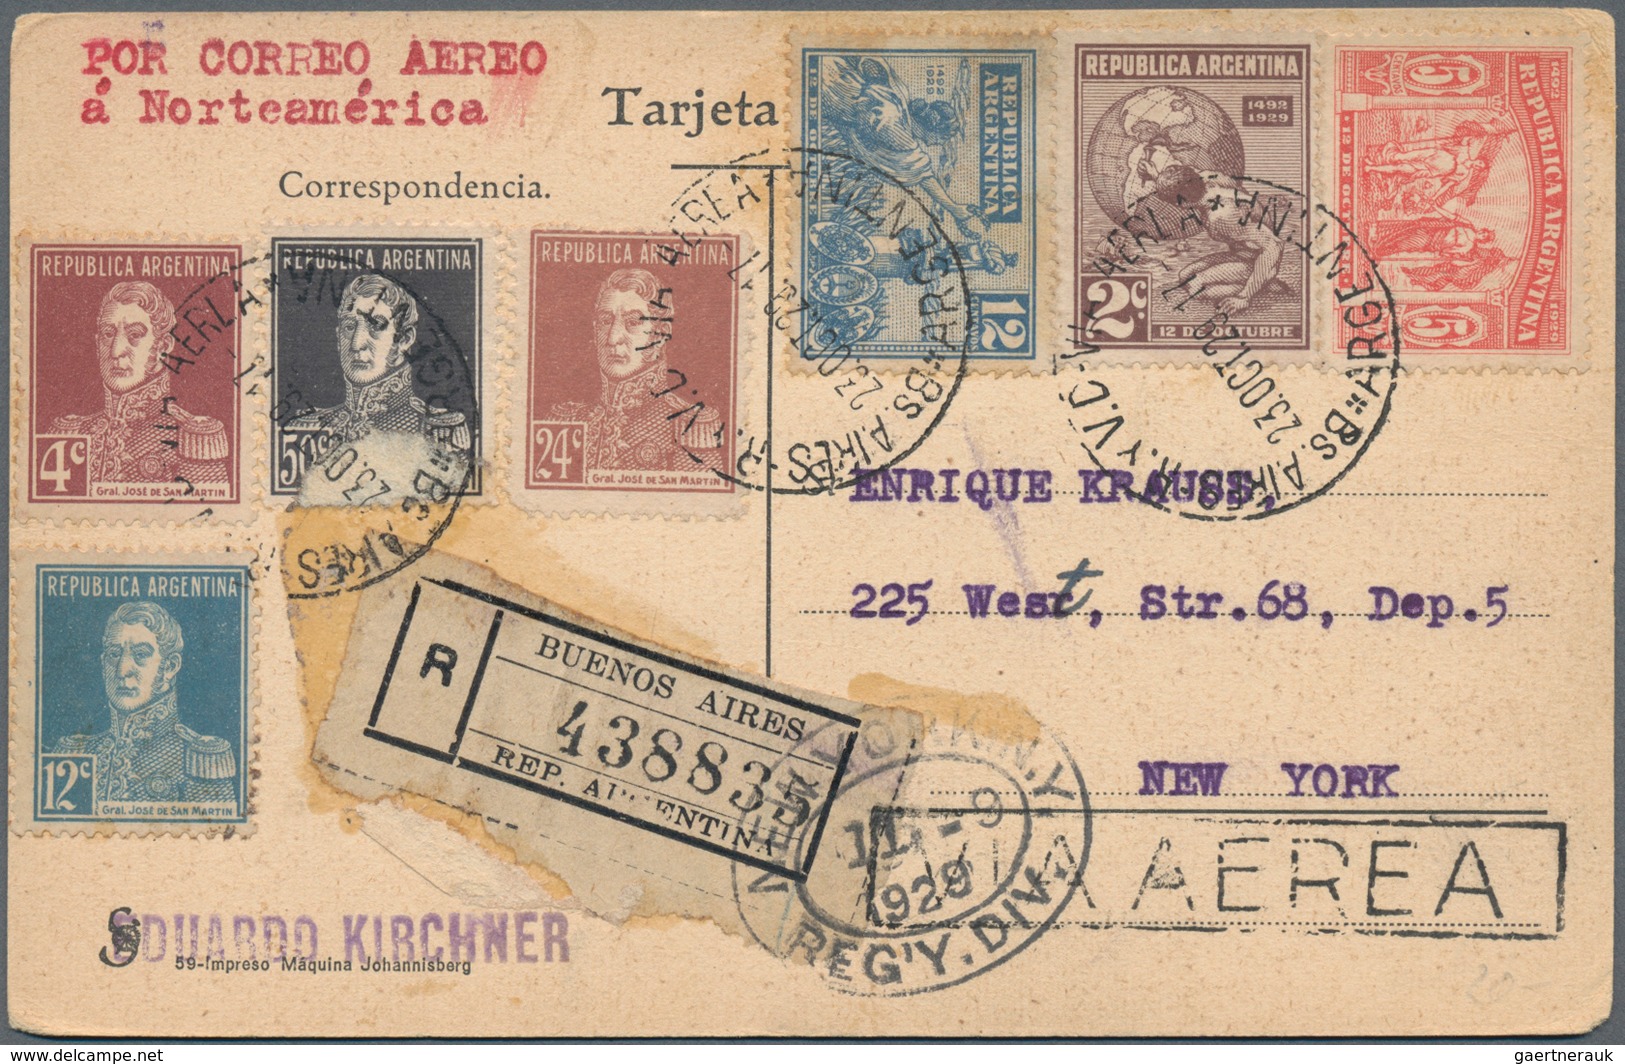 Argentinien: 1894/1954 (ca.), apprx. 290 covers and 17 mint/used stationery mostly from corresponden